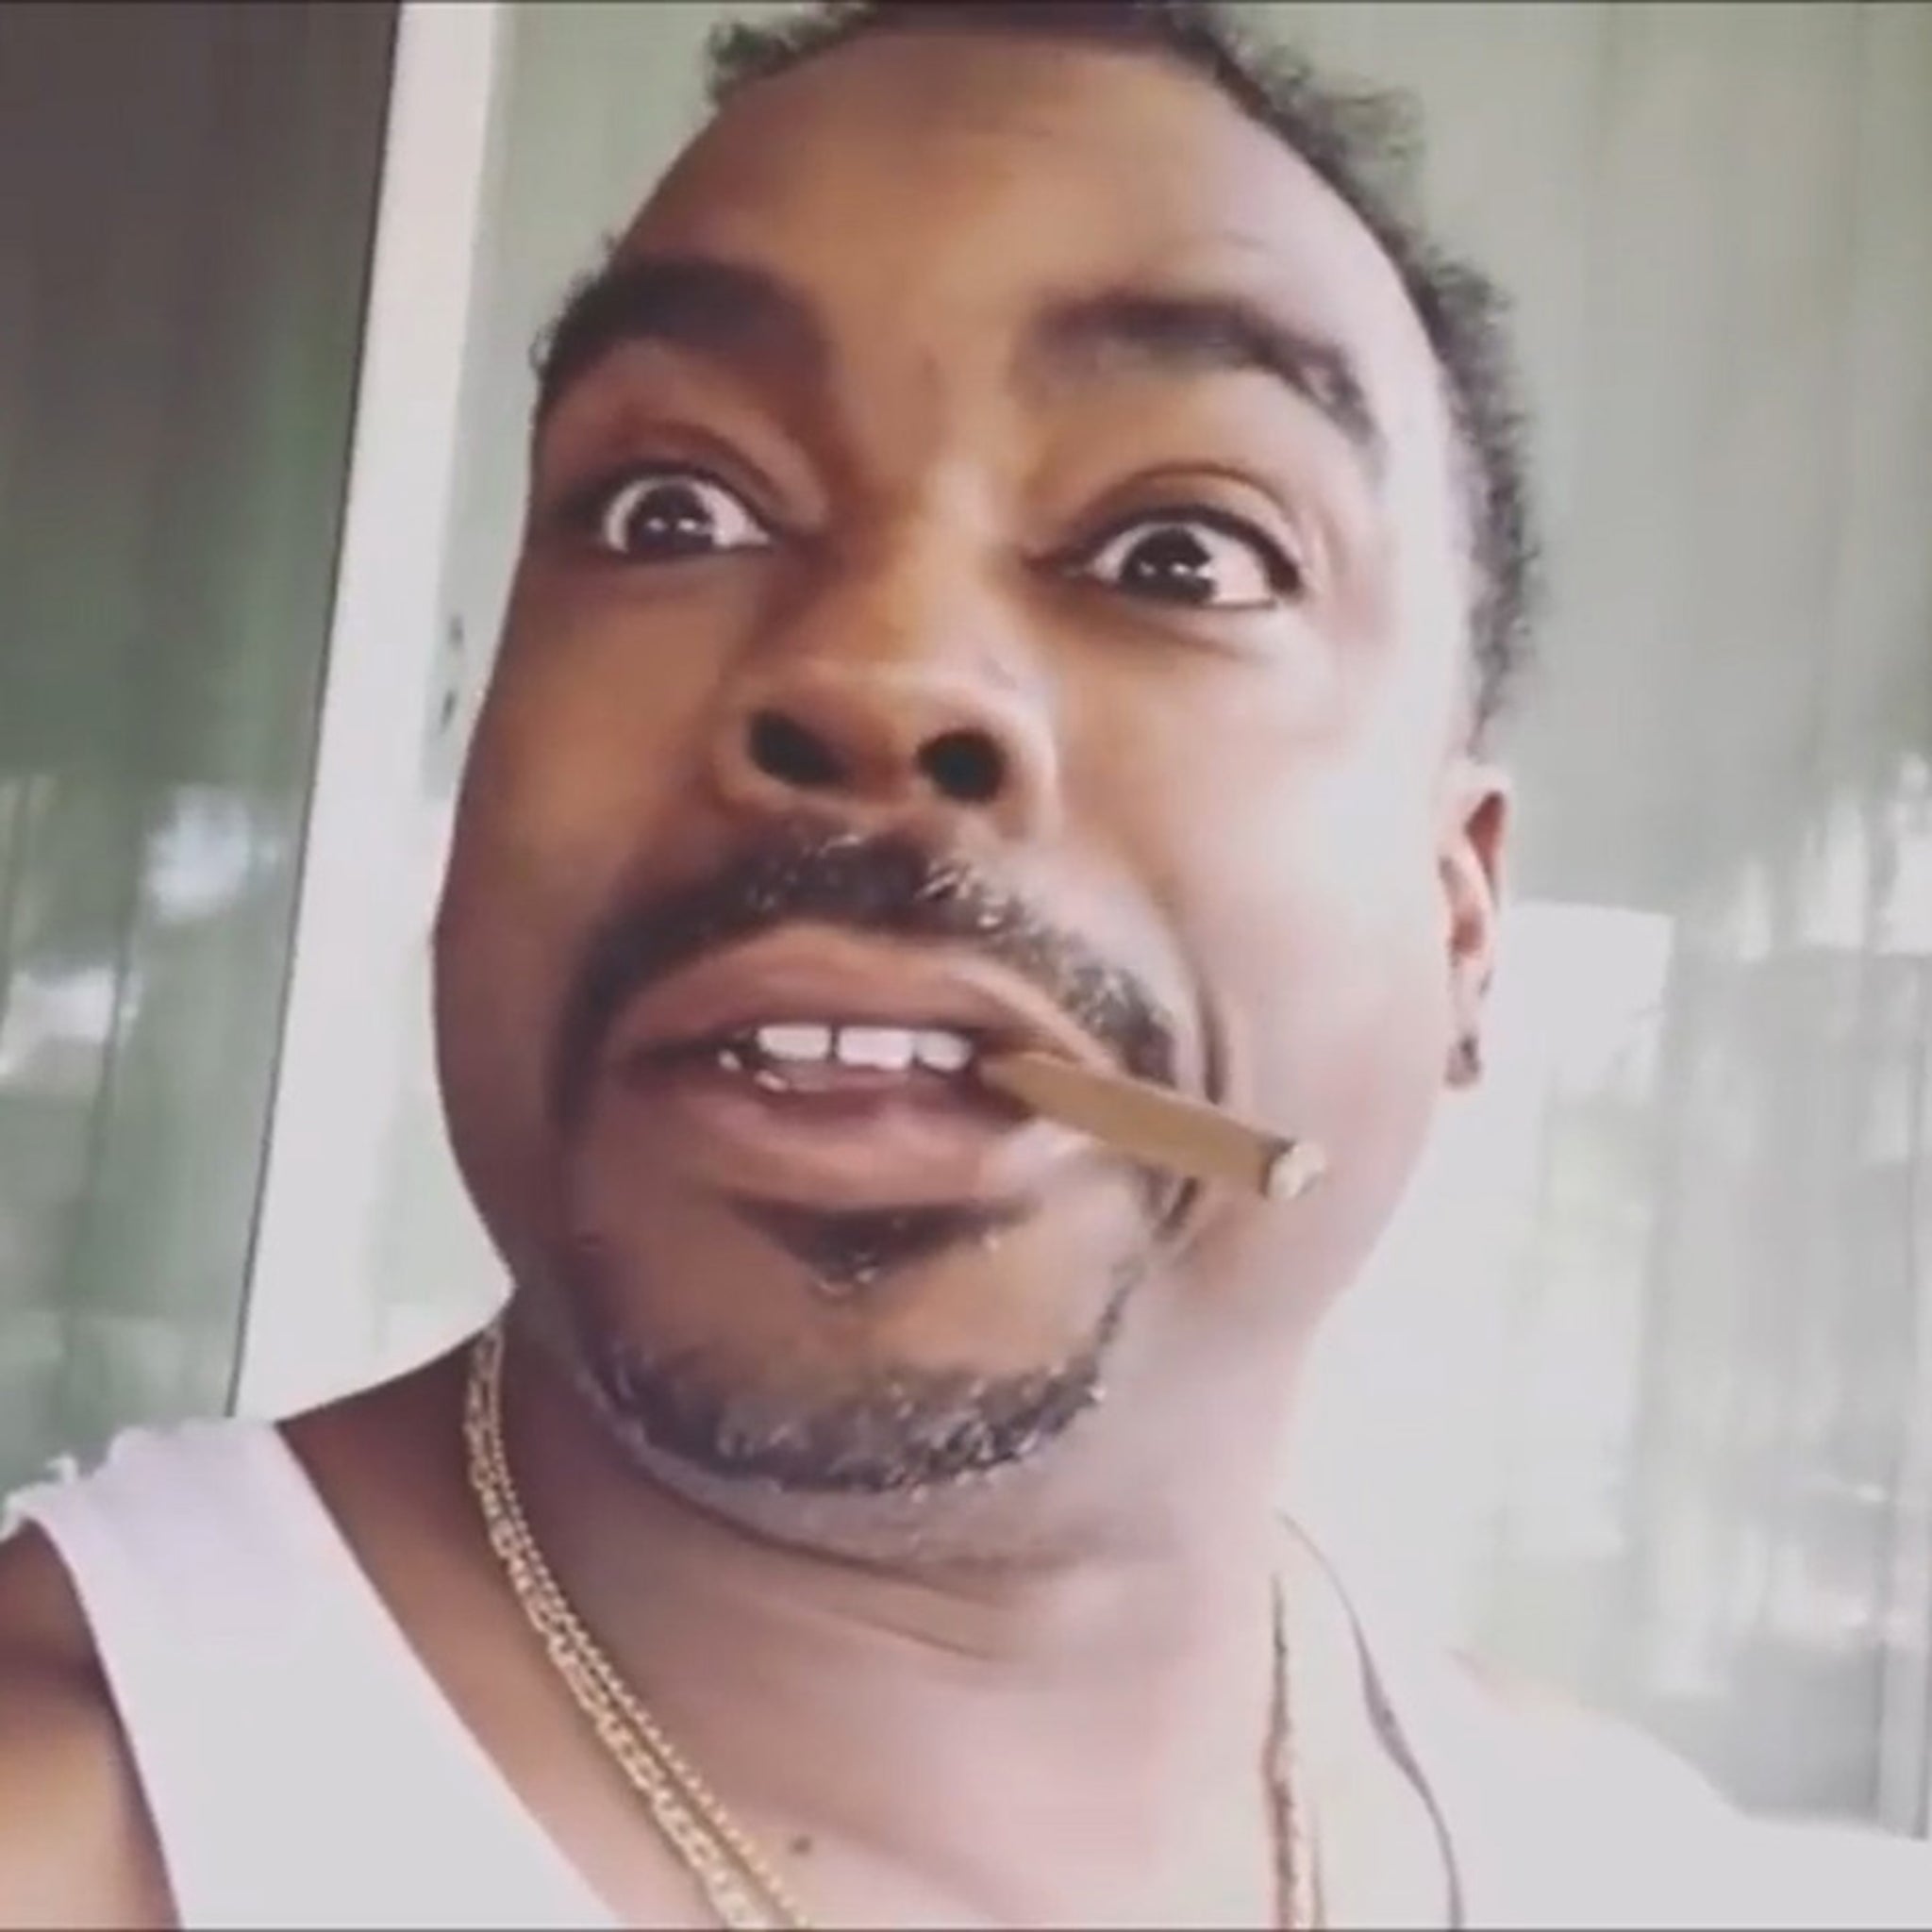 Daz Dillinger Wants the Crips to 'F*** Up' Kanye West